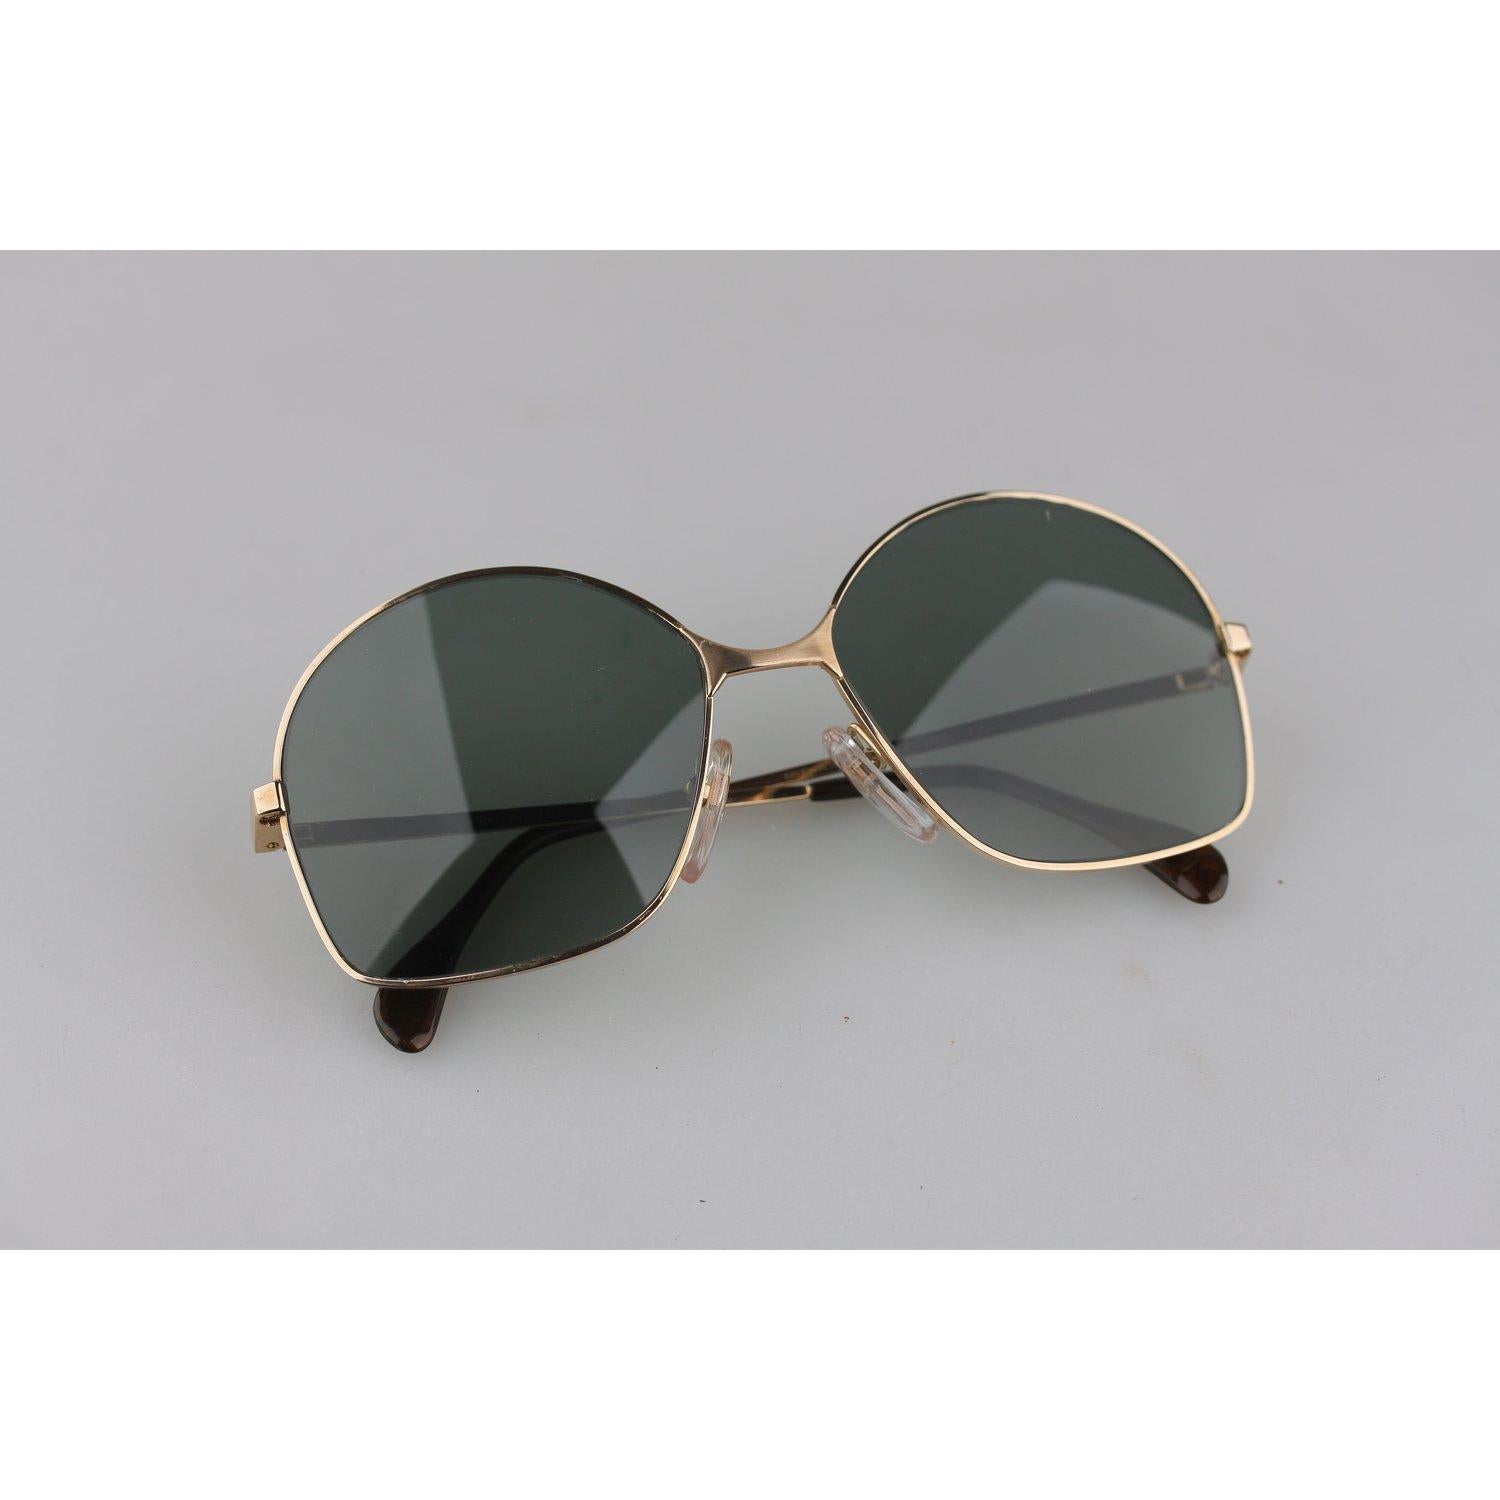 VERY RARE - Mint, Squared shaped Vintage Sunglasses by Bausch & Lomb. Made in West Germany. Gold color, Gold Filled Frame. Model: 516- 54/16 - 130 mm. Details MATERIAL: Gold Filled COLOR: Gold MODEL: 516 GENDER: Adult Unisex SIZE: M Condition A+ -